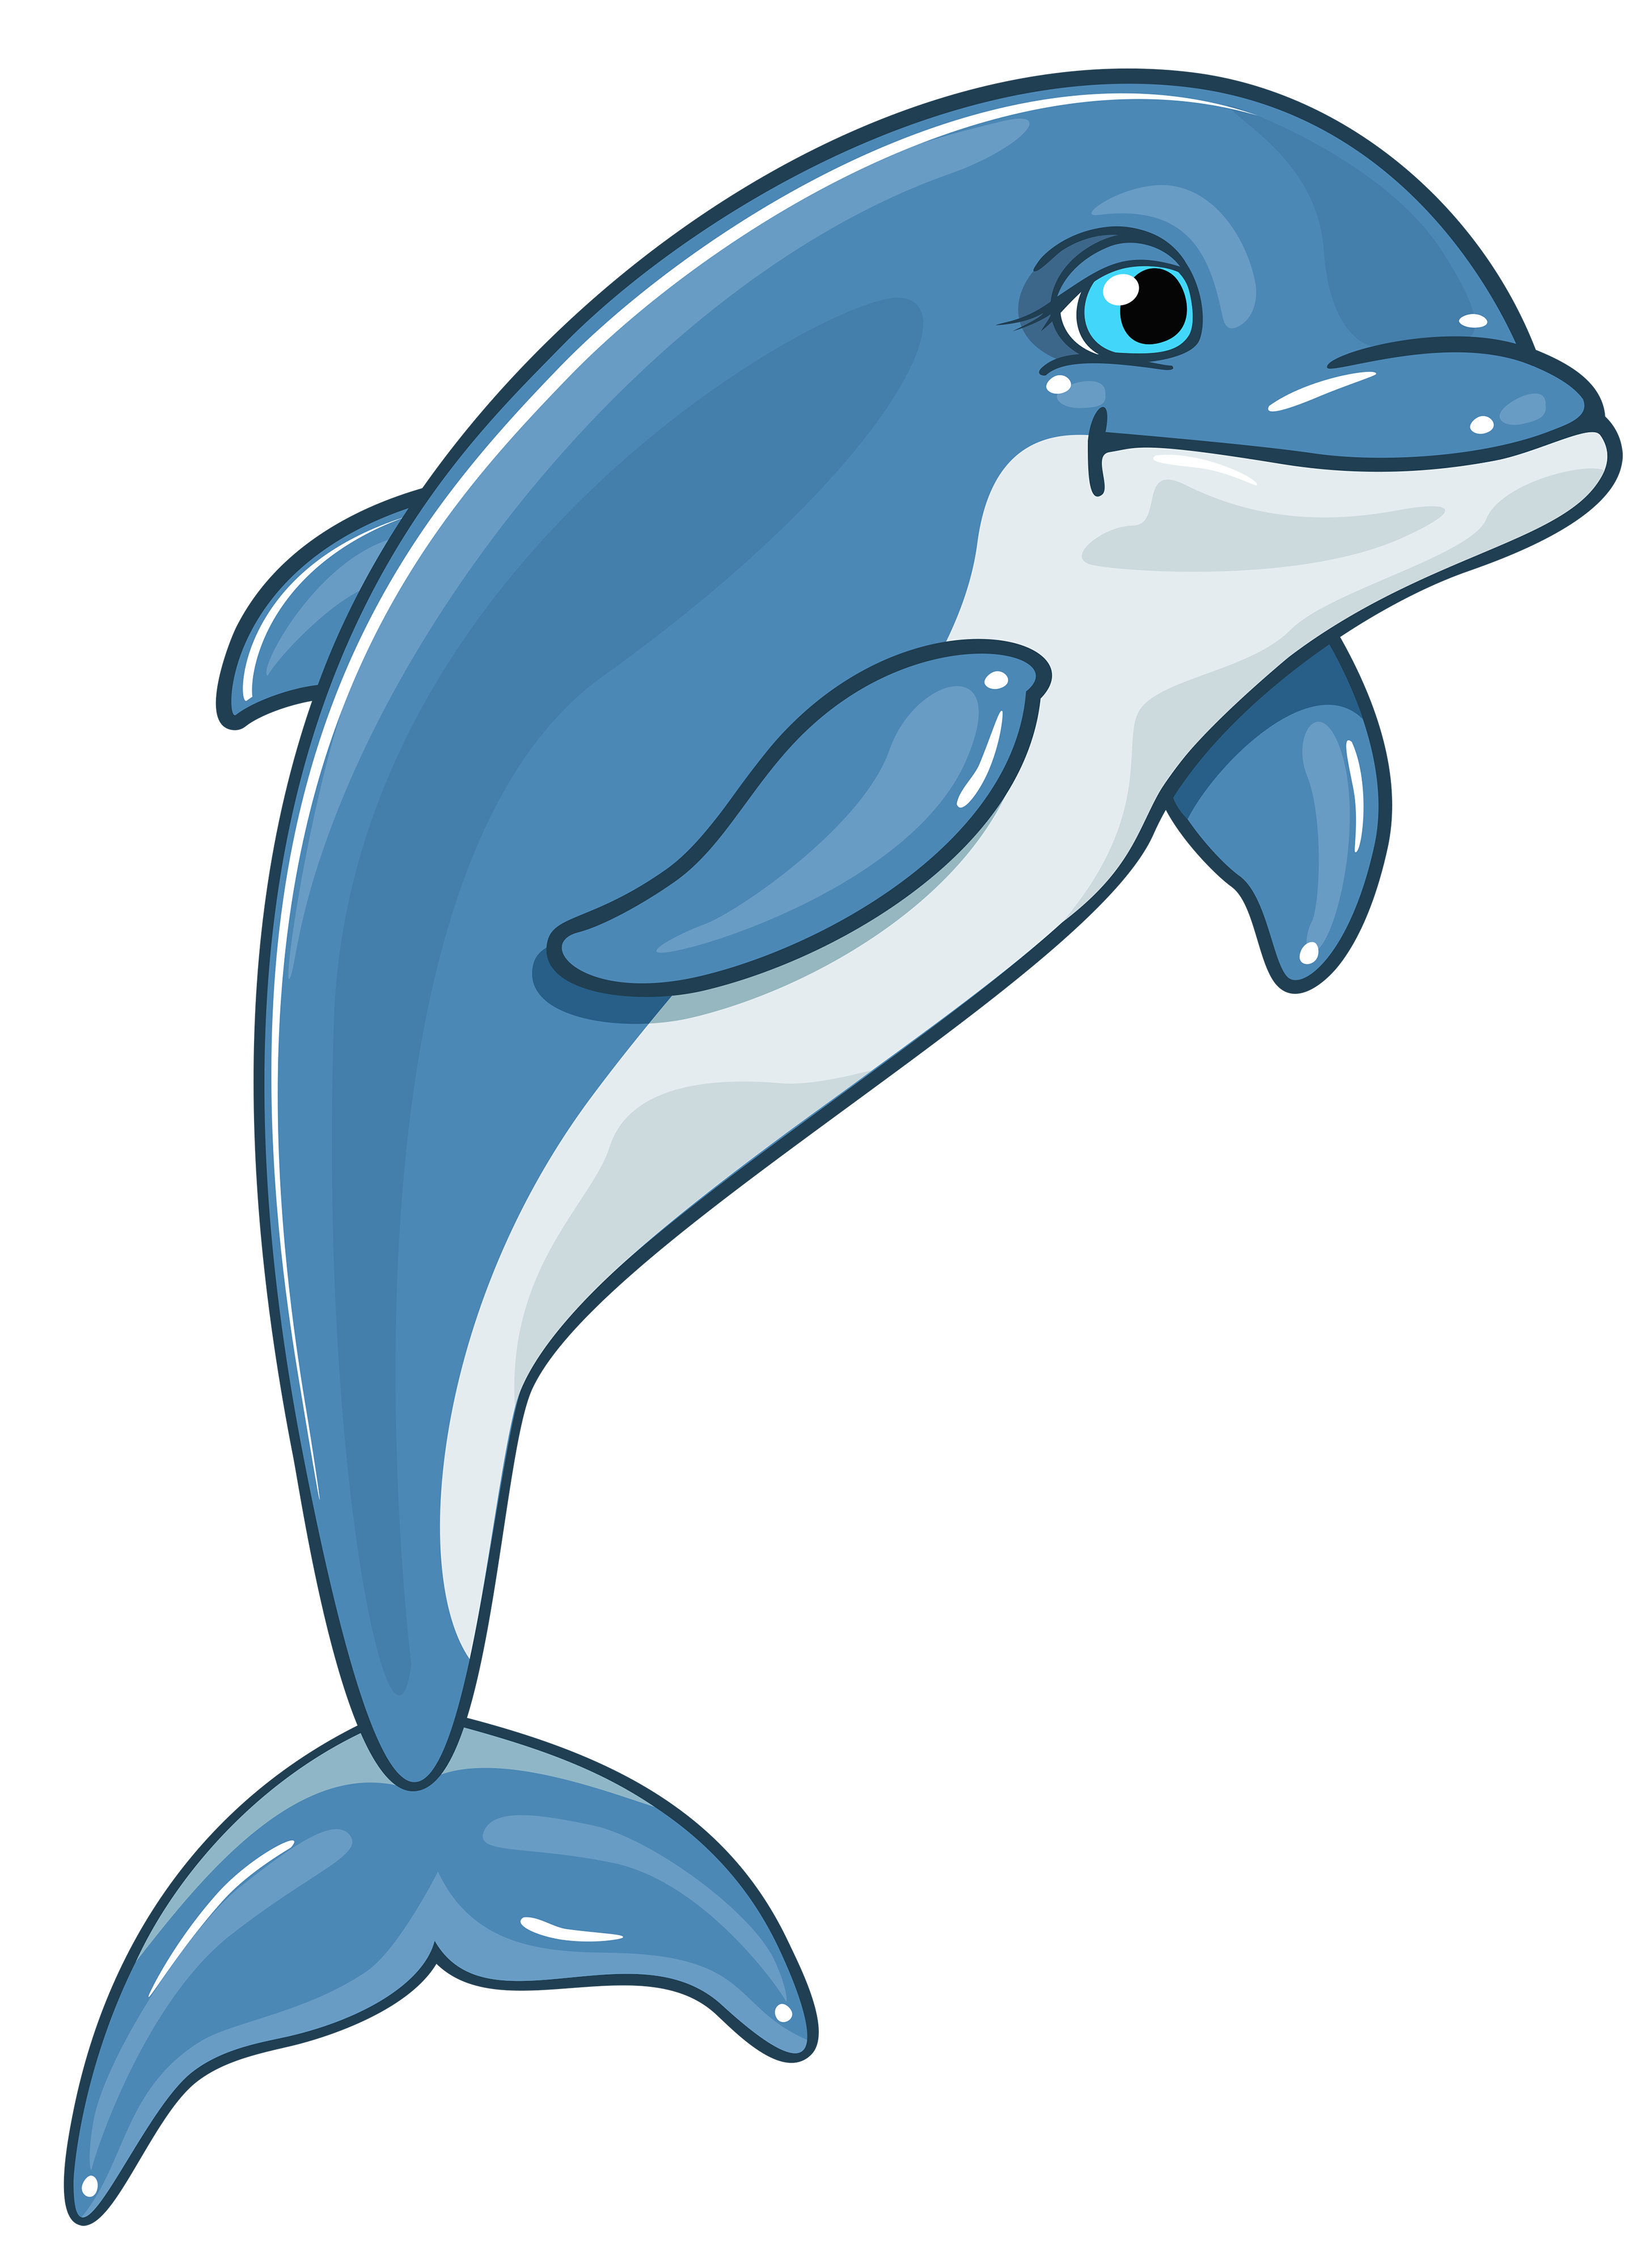 Dolphin clipart images - ClipartFox